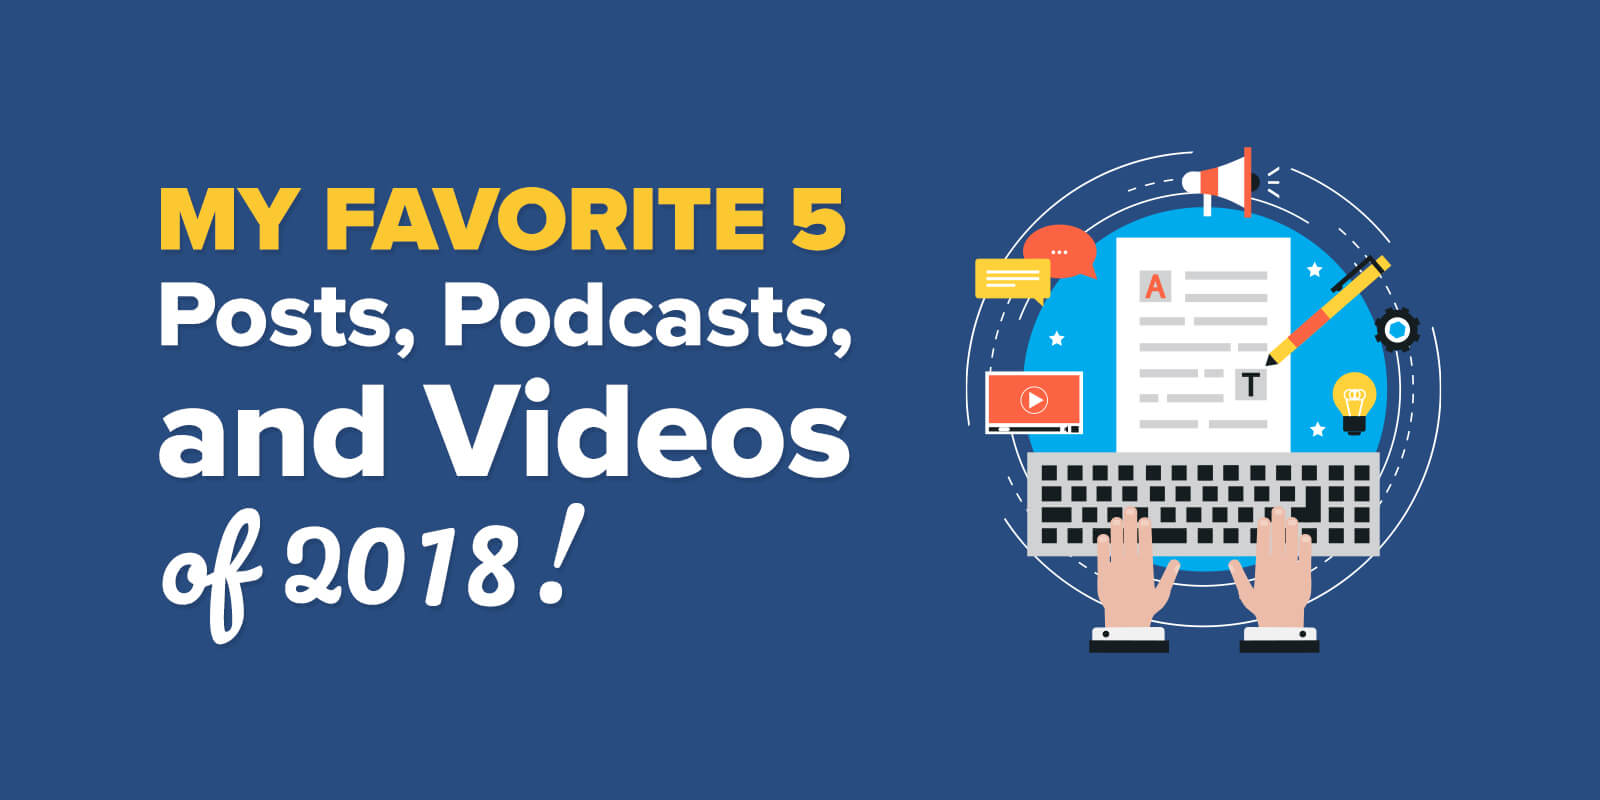 My Favorite 5 Posts, Podcasts, and Videos of 2018!